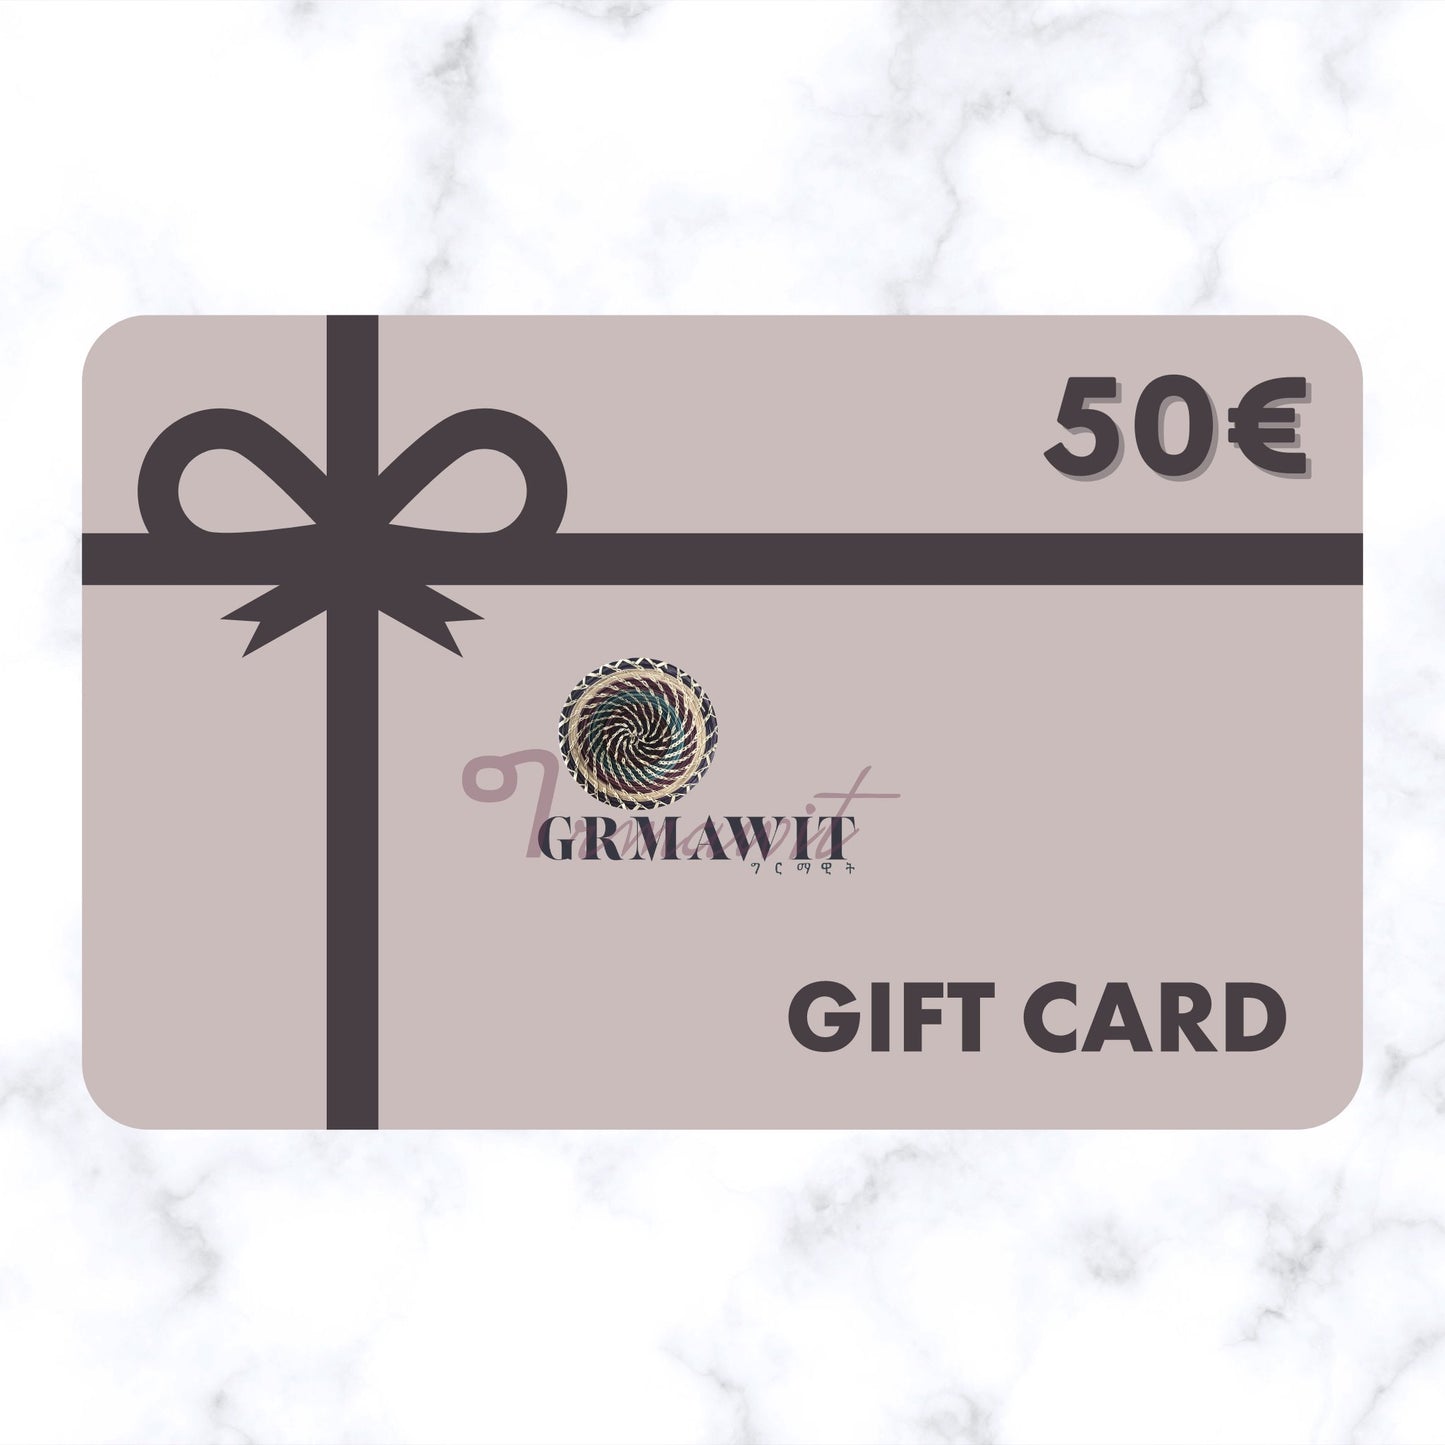 GIFT CARD Gift Cards Grmawit 50,00 € 